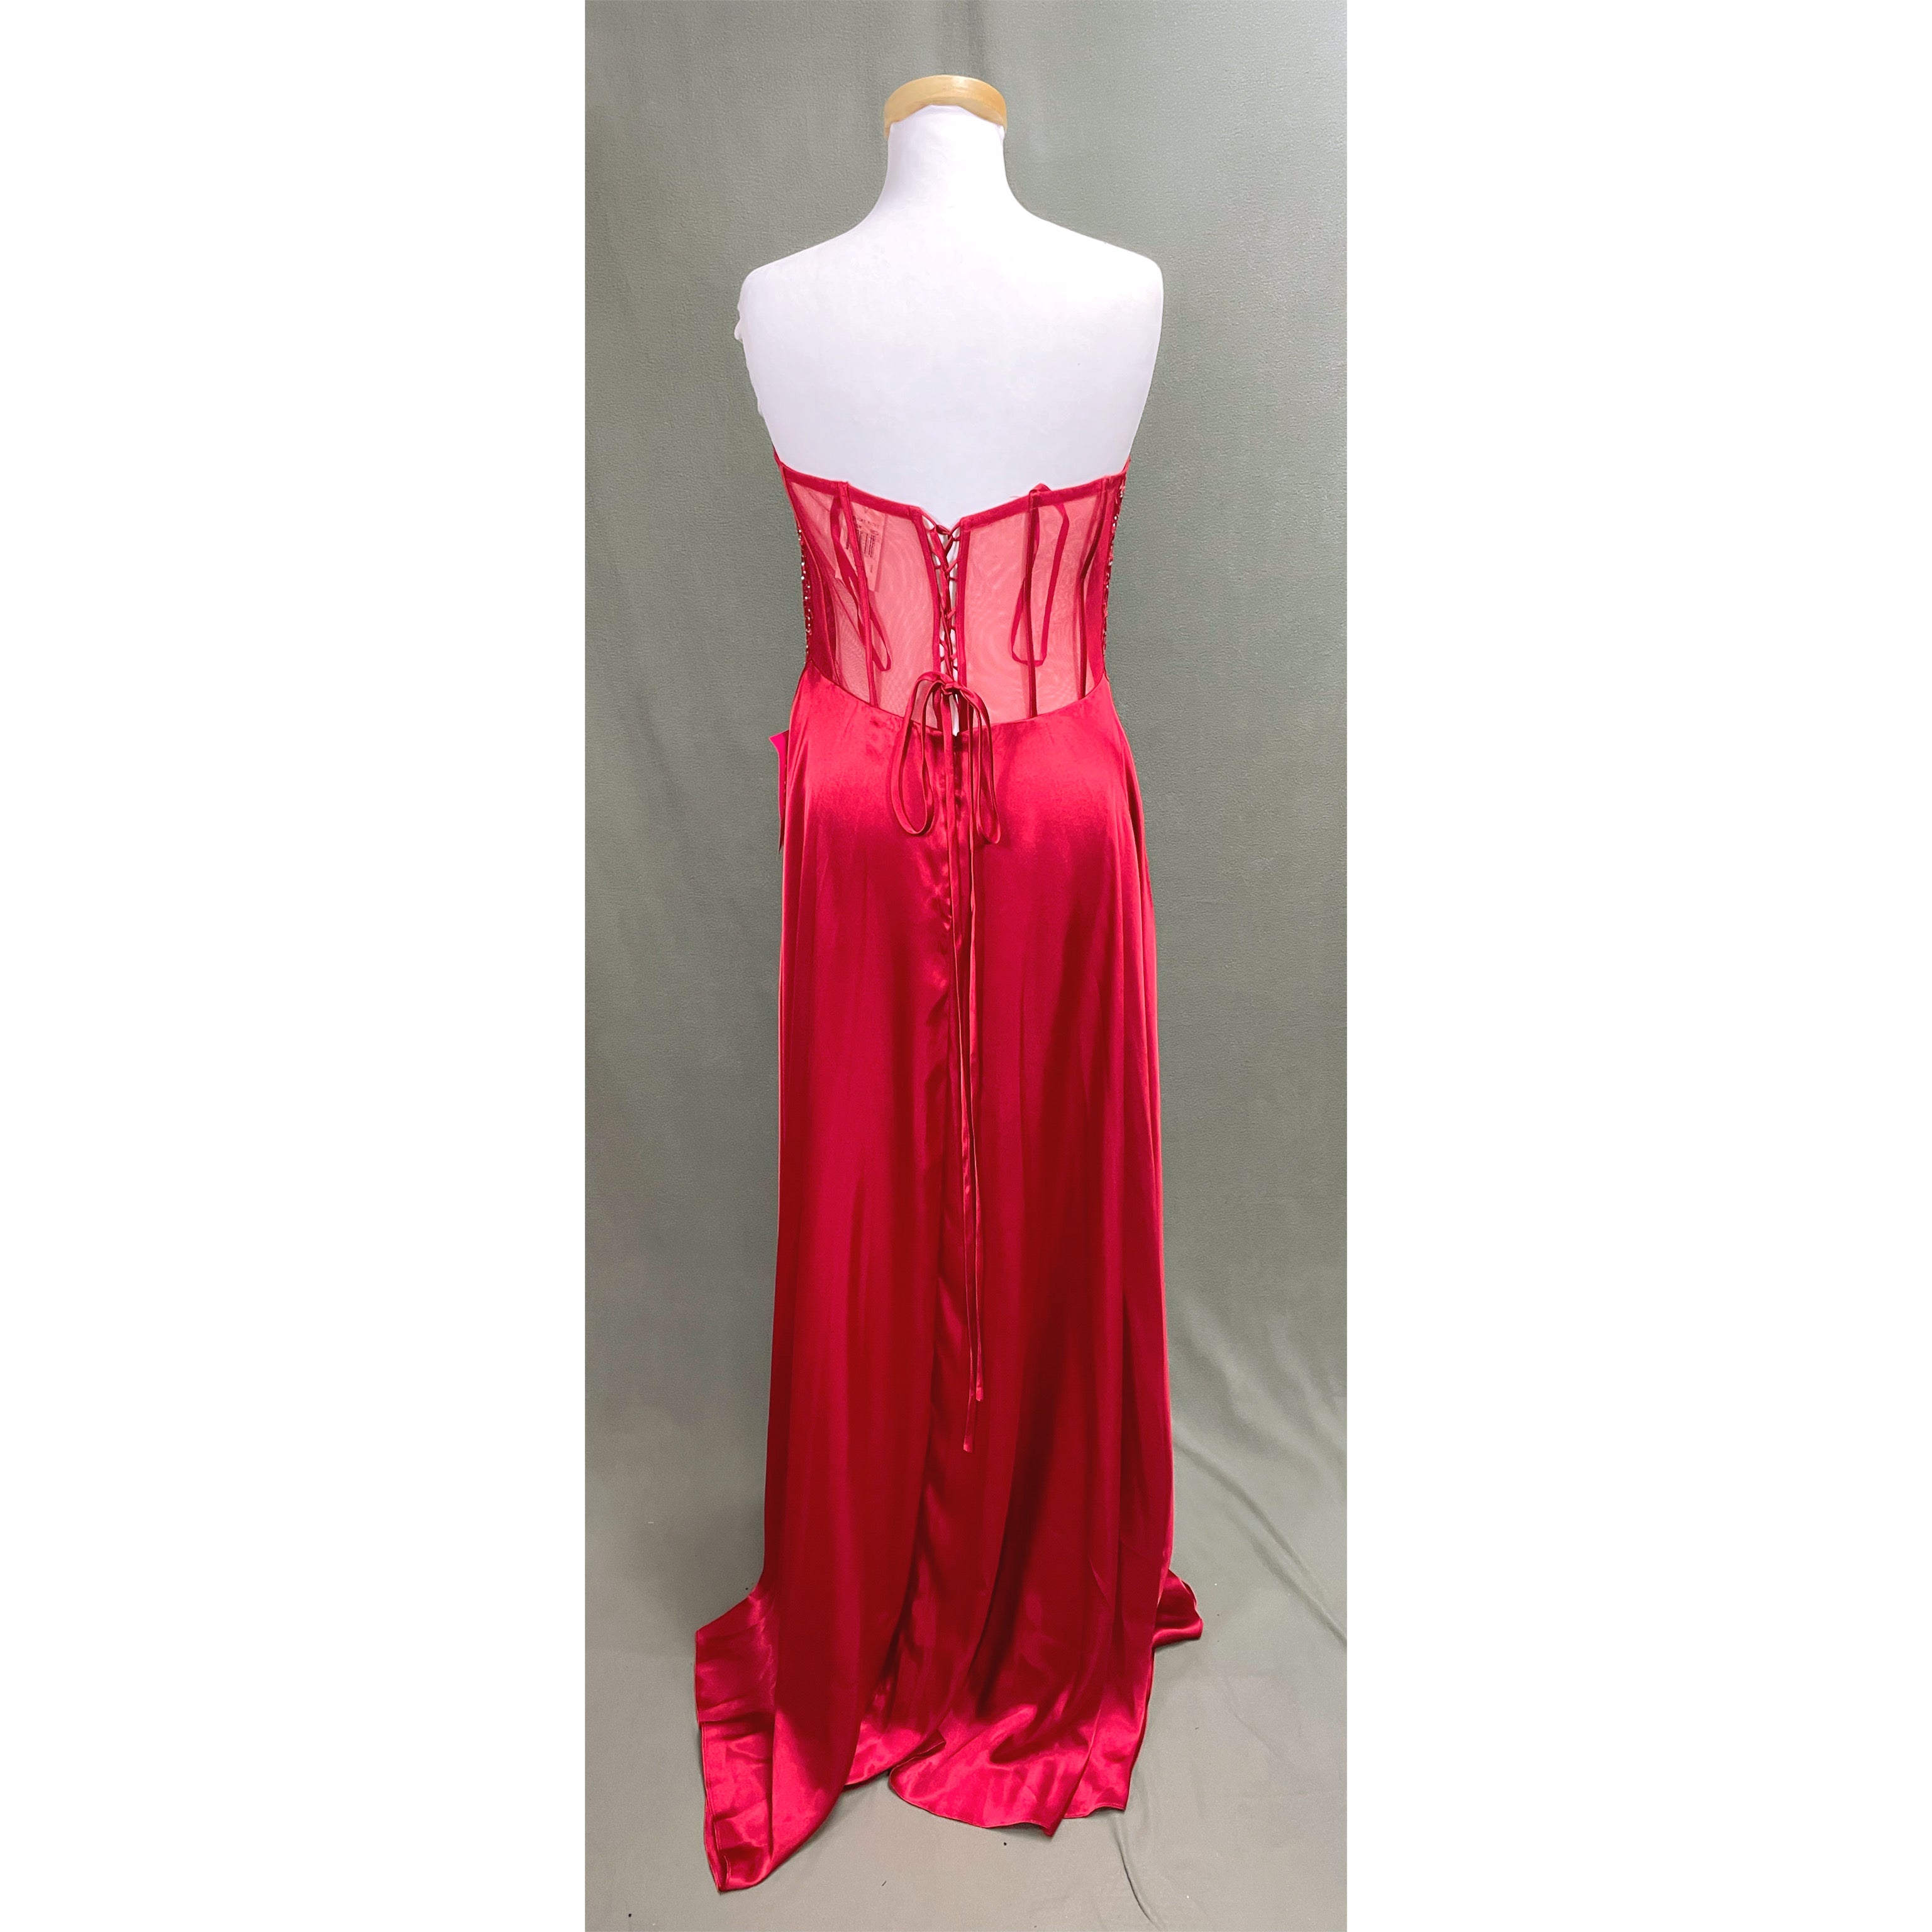 Blondie Nites red dress, size 13, NEW WITH TAGS!